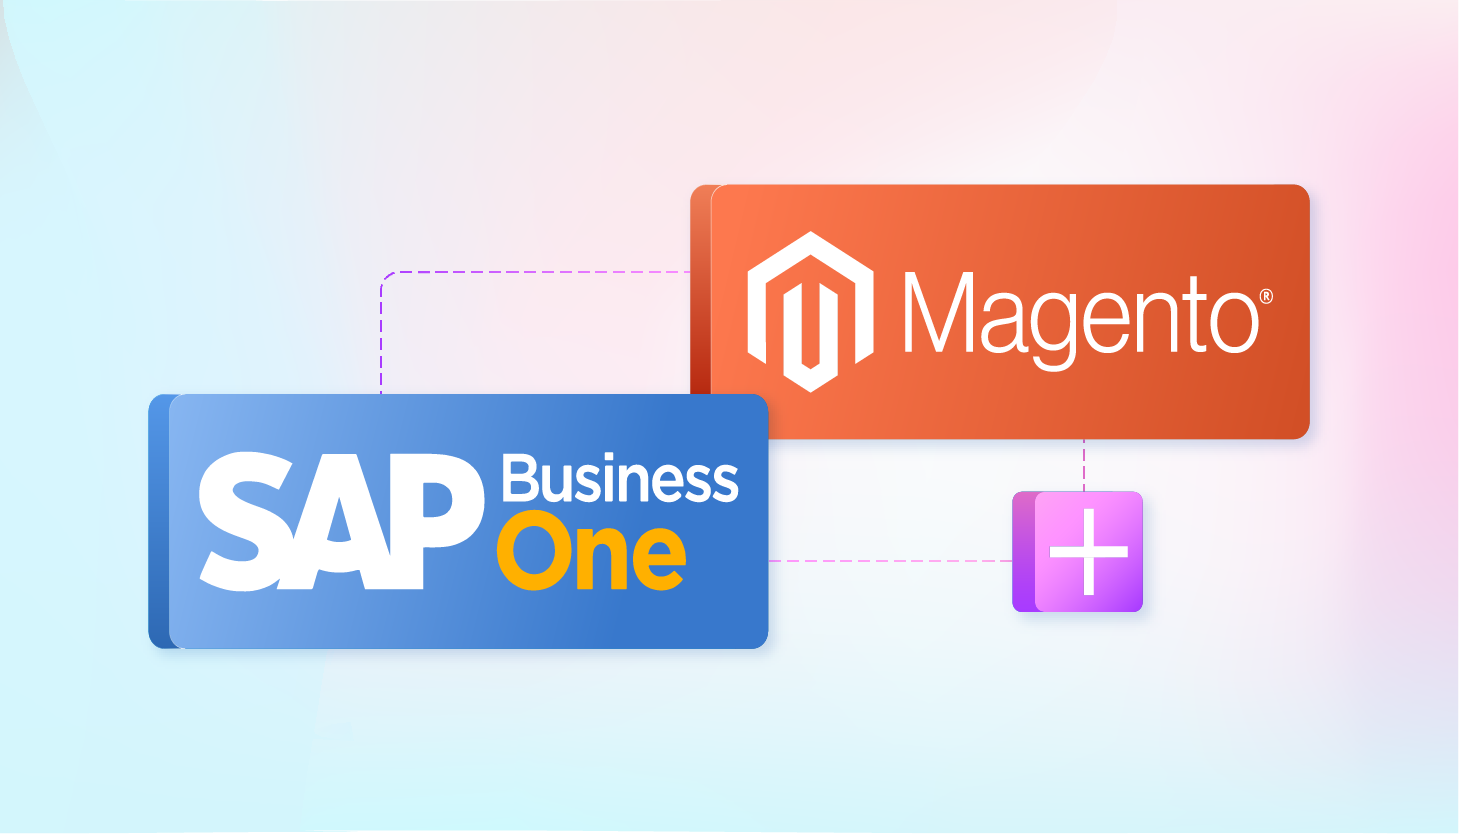 Why Use Magento Integration with SAP Business One?